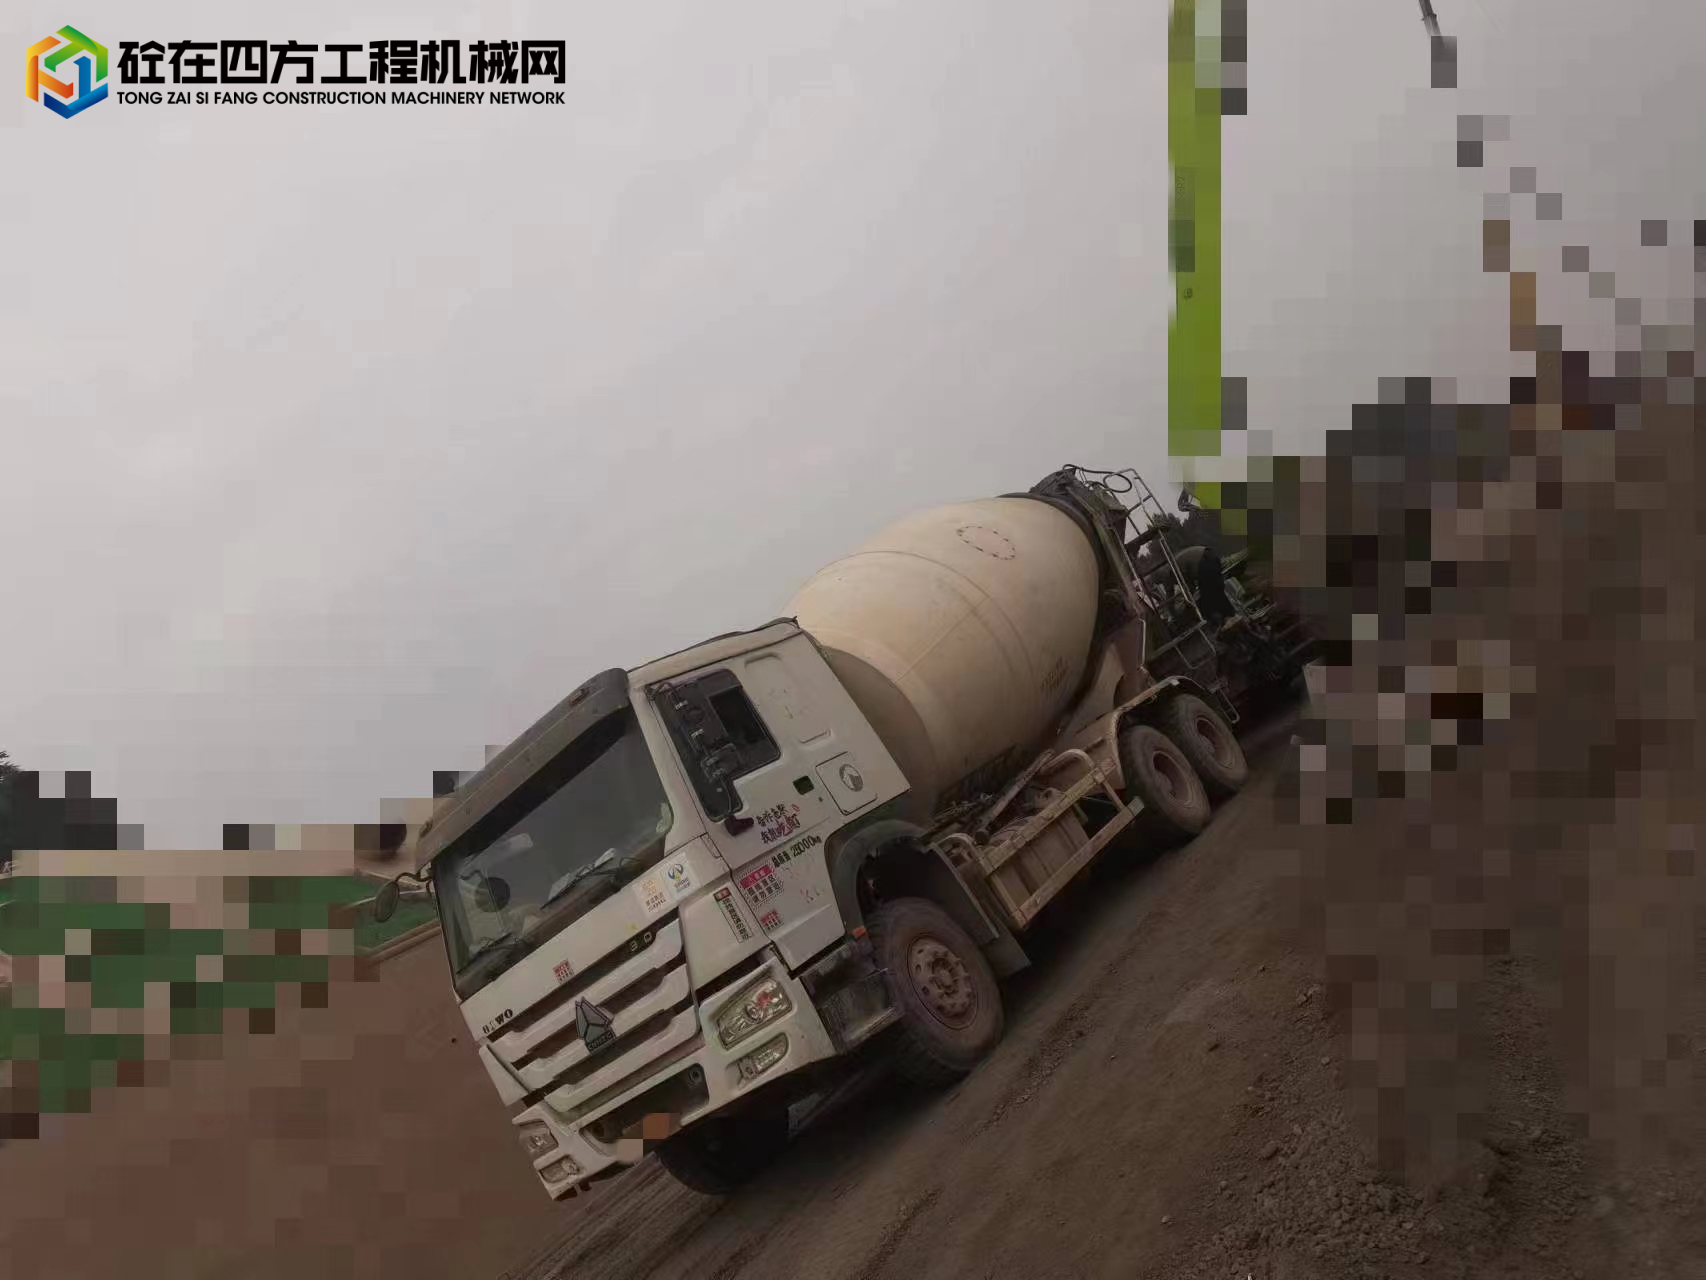 https://images.tongzsf.com/tong/truck_machine/20231226/1658a7a2daced5.jpg